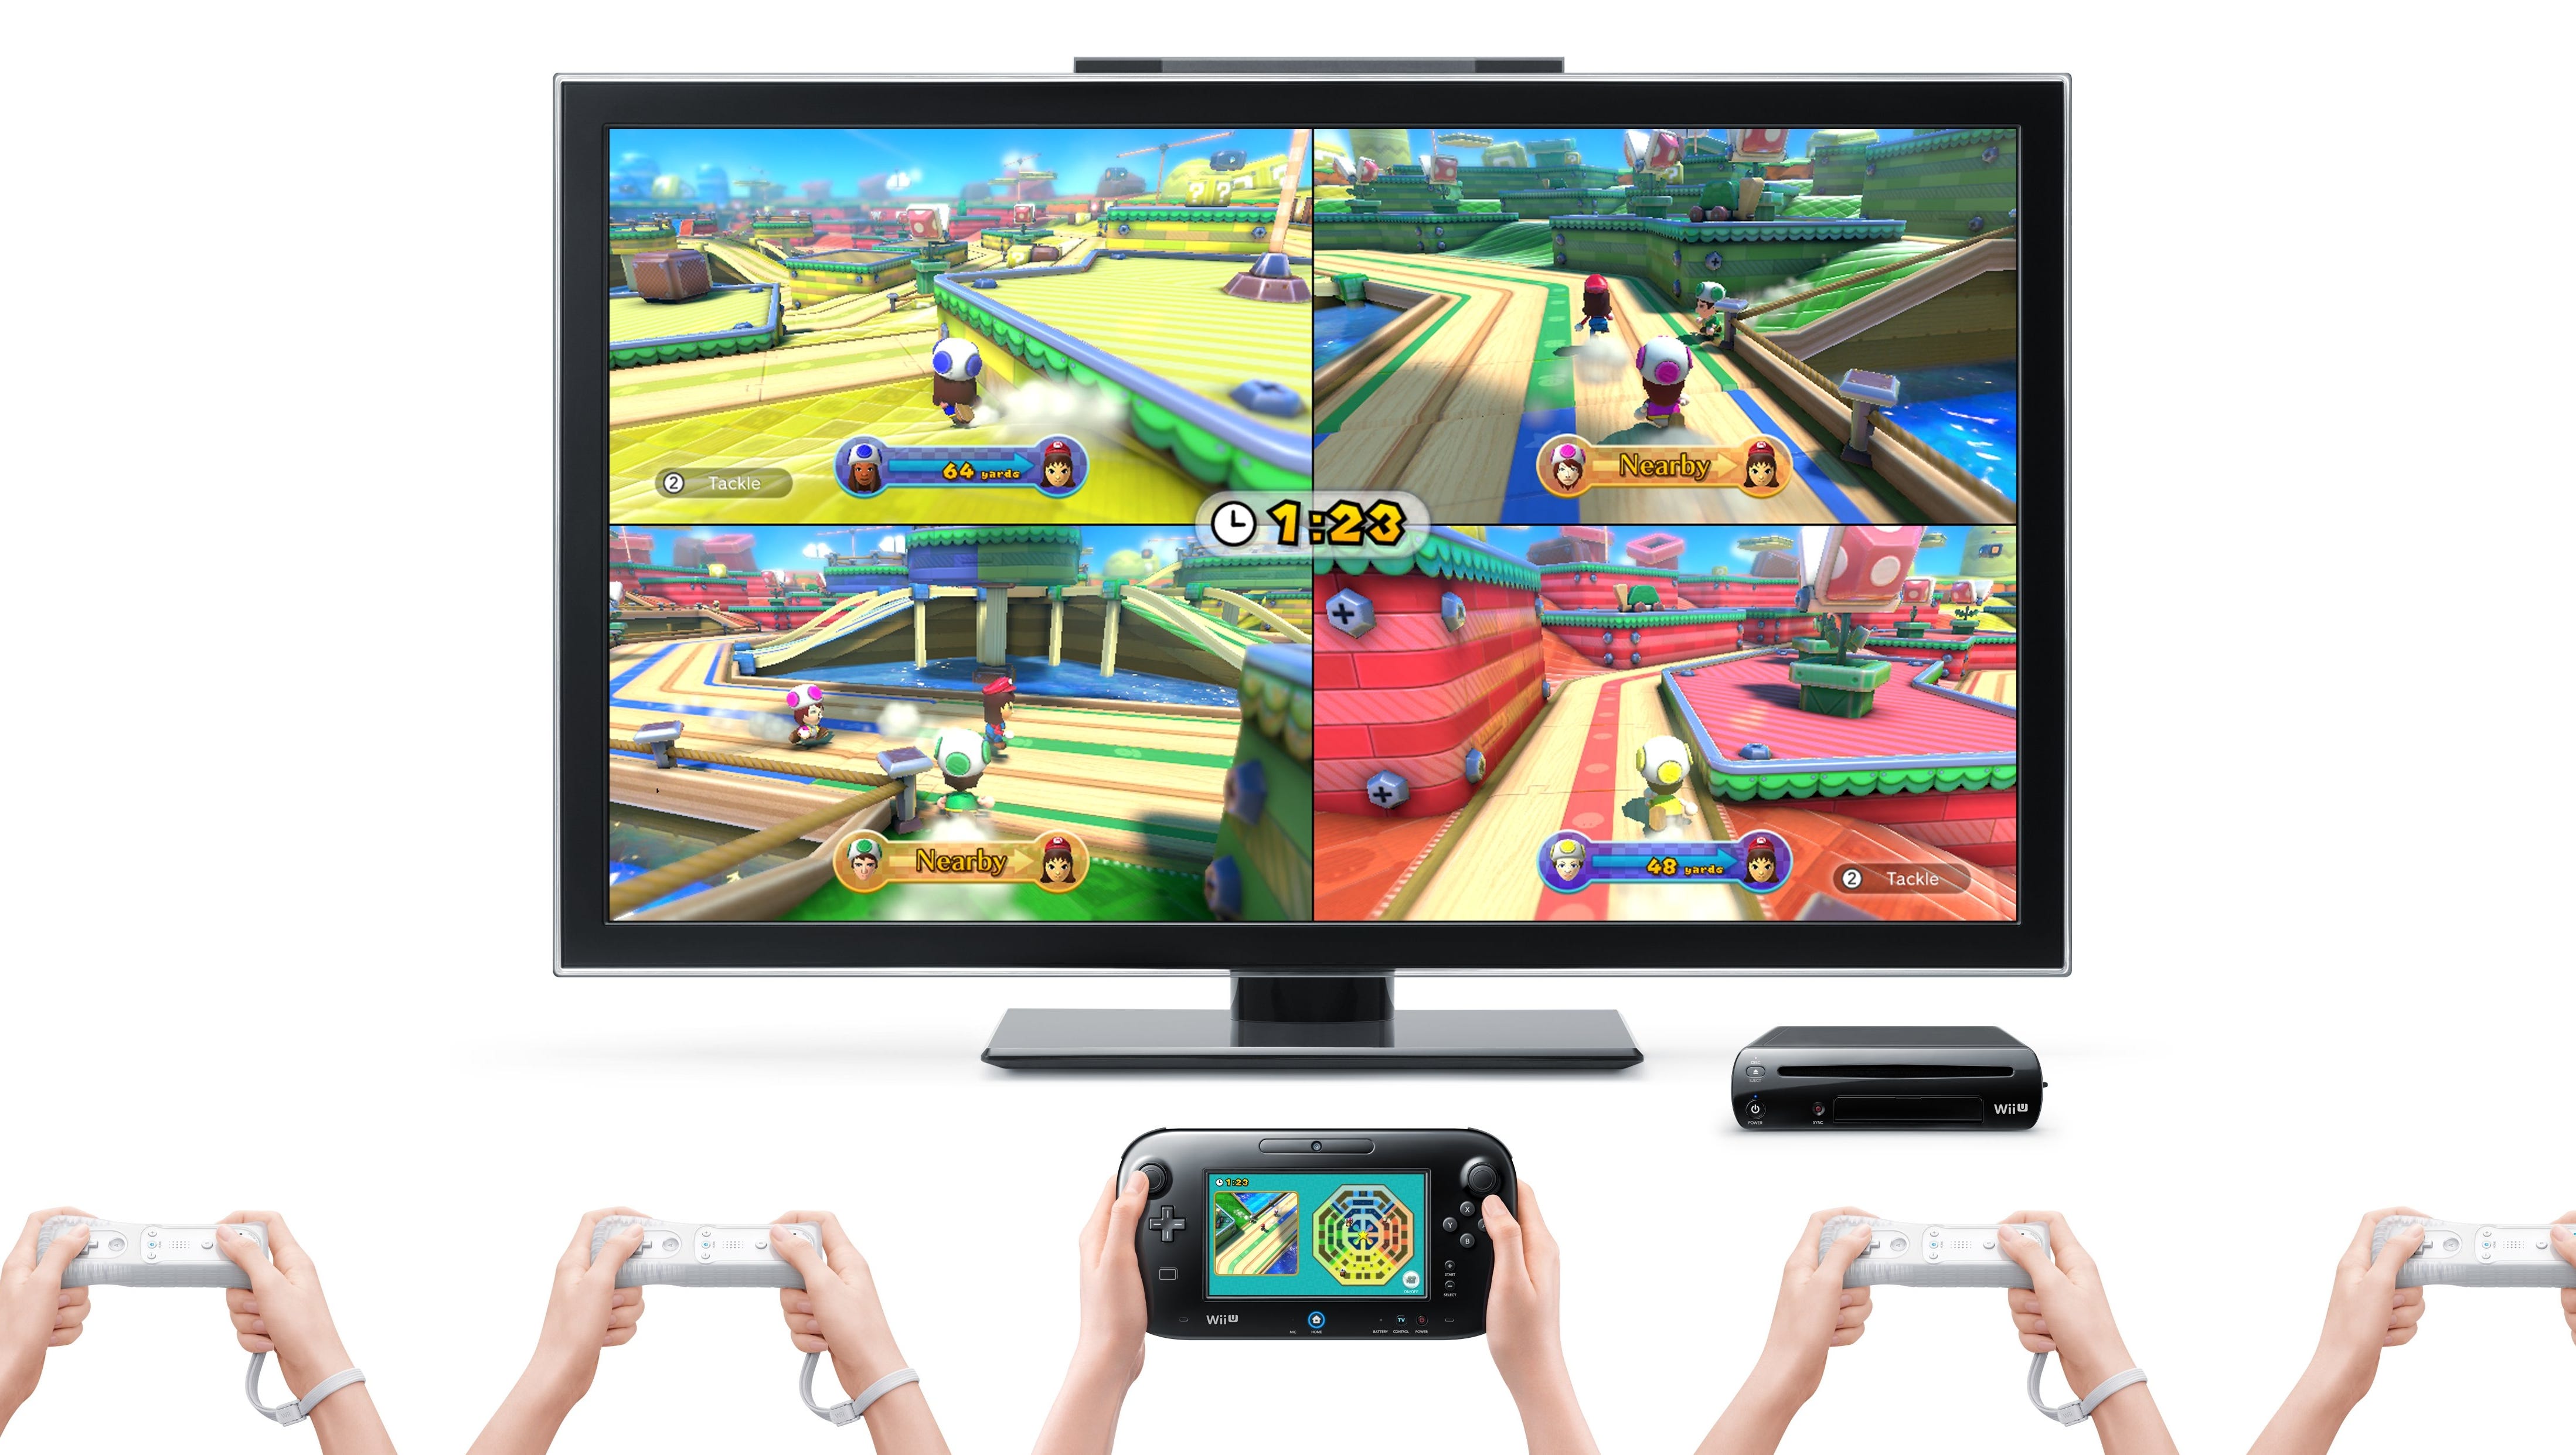 wii u games for toddlers age 3